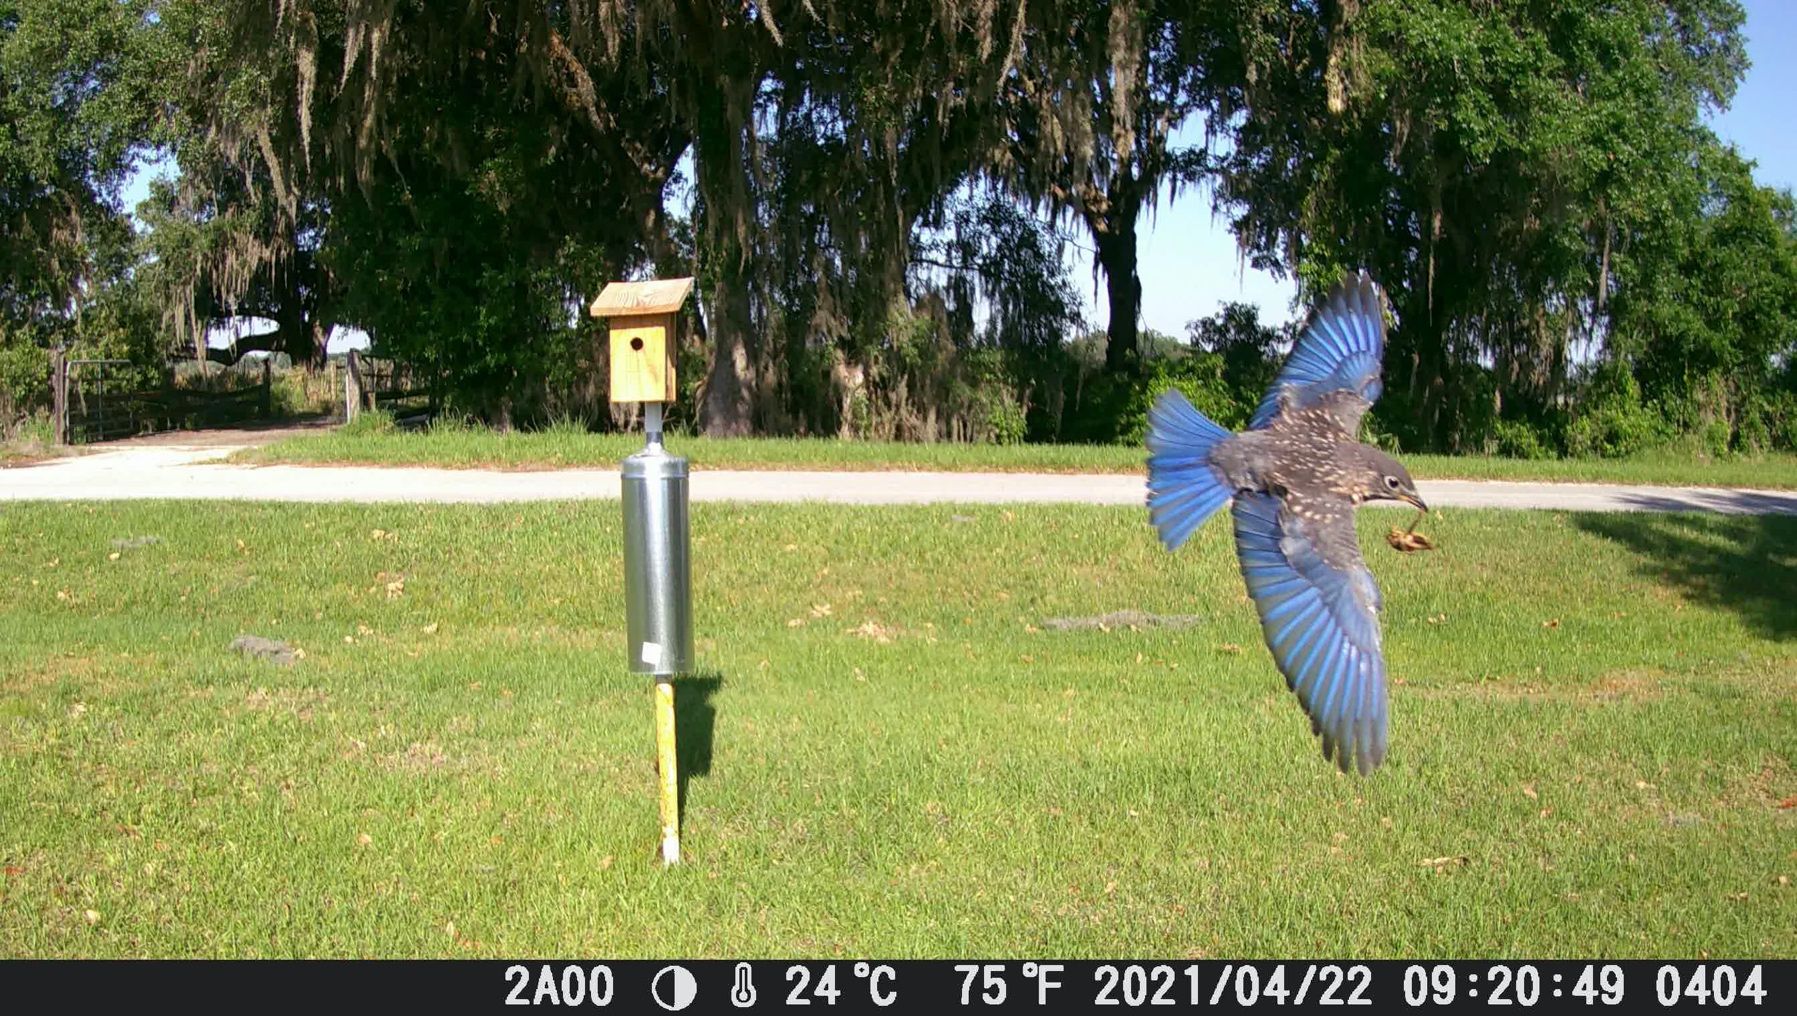 Male juvenile eastern bluebird with insect prey near nest box. 